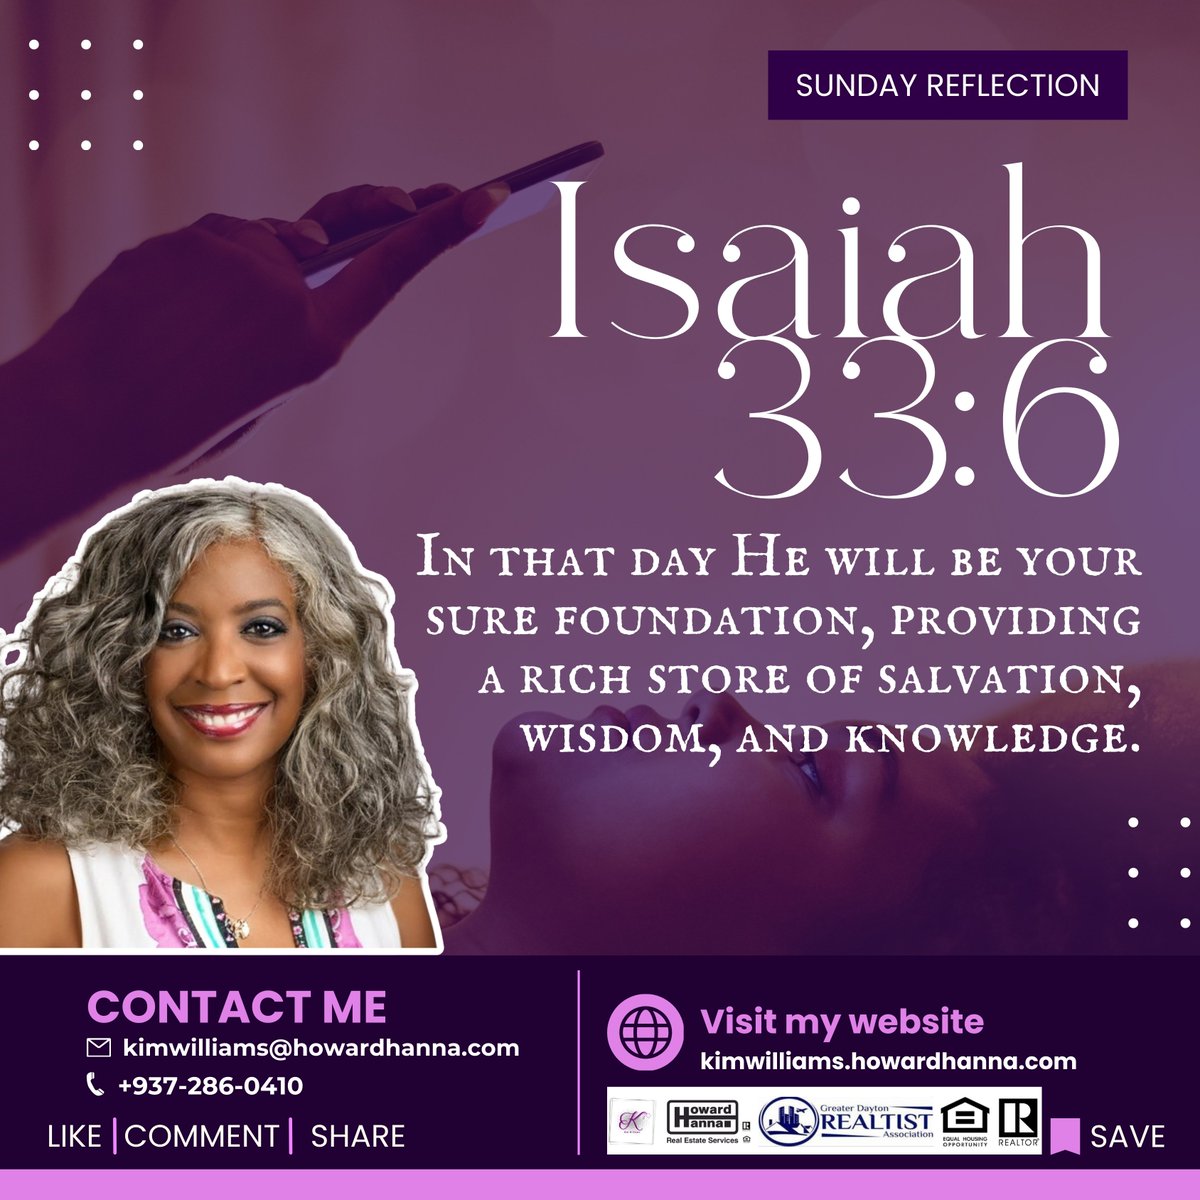 Feeling lost and unstable? Isaiah 33:6 offers a message of hope: God's wisdom and knowledge can be the foundation for secure times. True treasure lies in revering Him, and with that comes abundance of salvation, wisdom, and knowledge. 

#Bible #Isaiah336 #FaithHopeLove